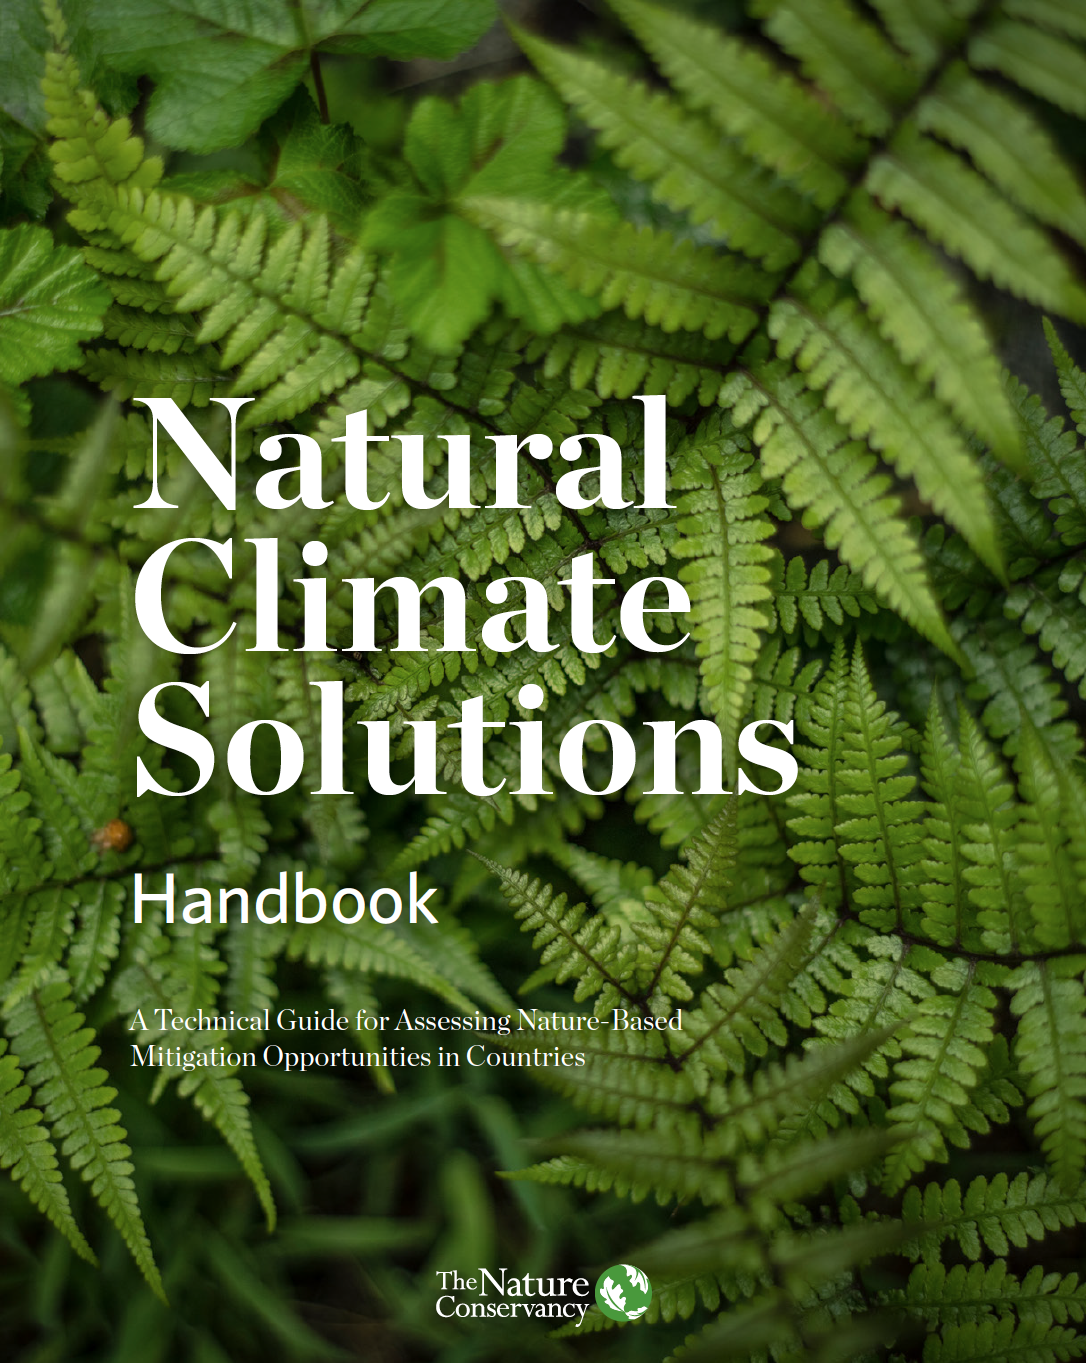 Text that says Natural Climate Solutions Handbook with micro shot of ferns.